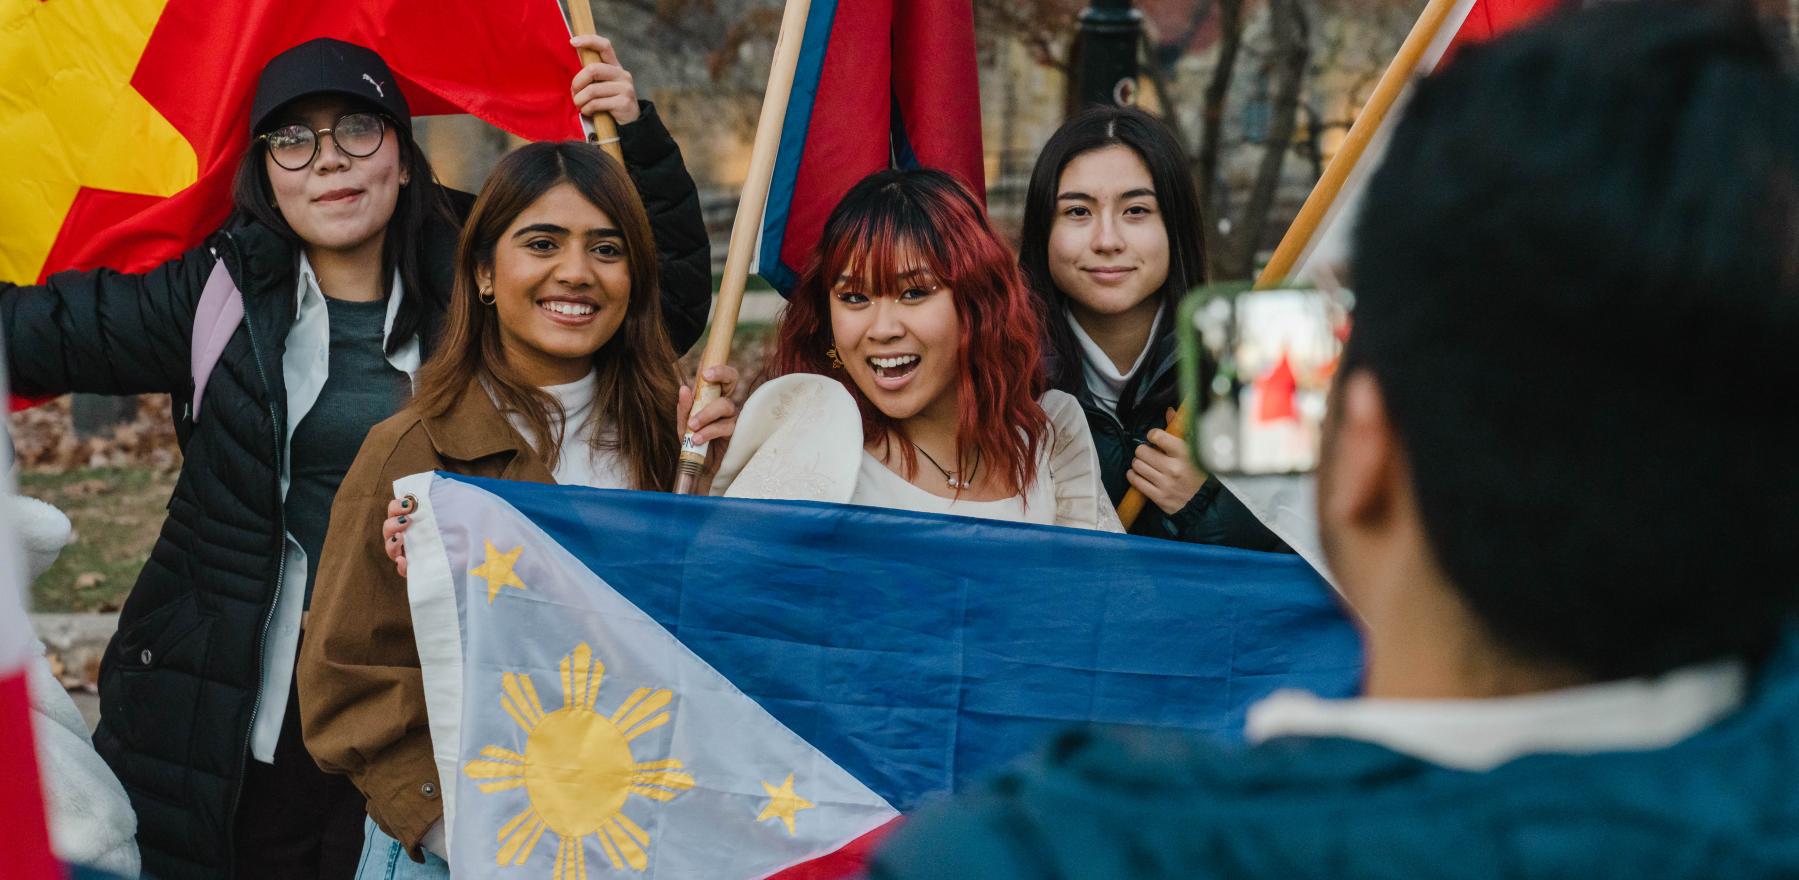 A man with his back to the camera takes a smartphone photo of four young owmen smiling and holding up a variety of flags